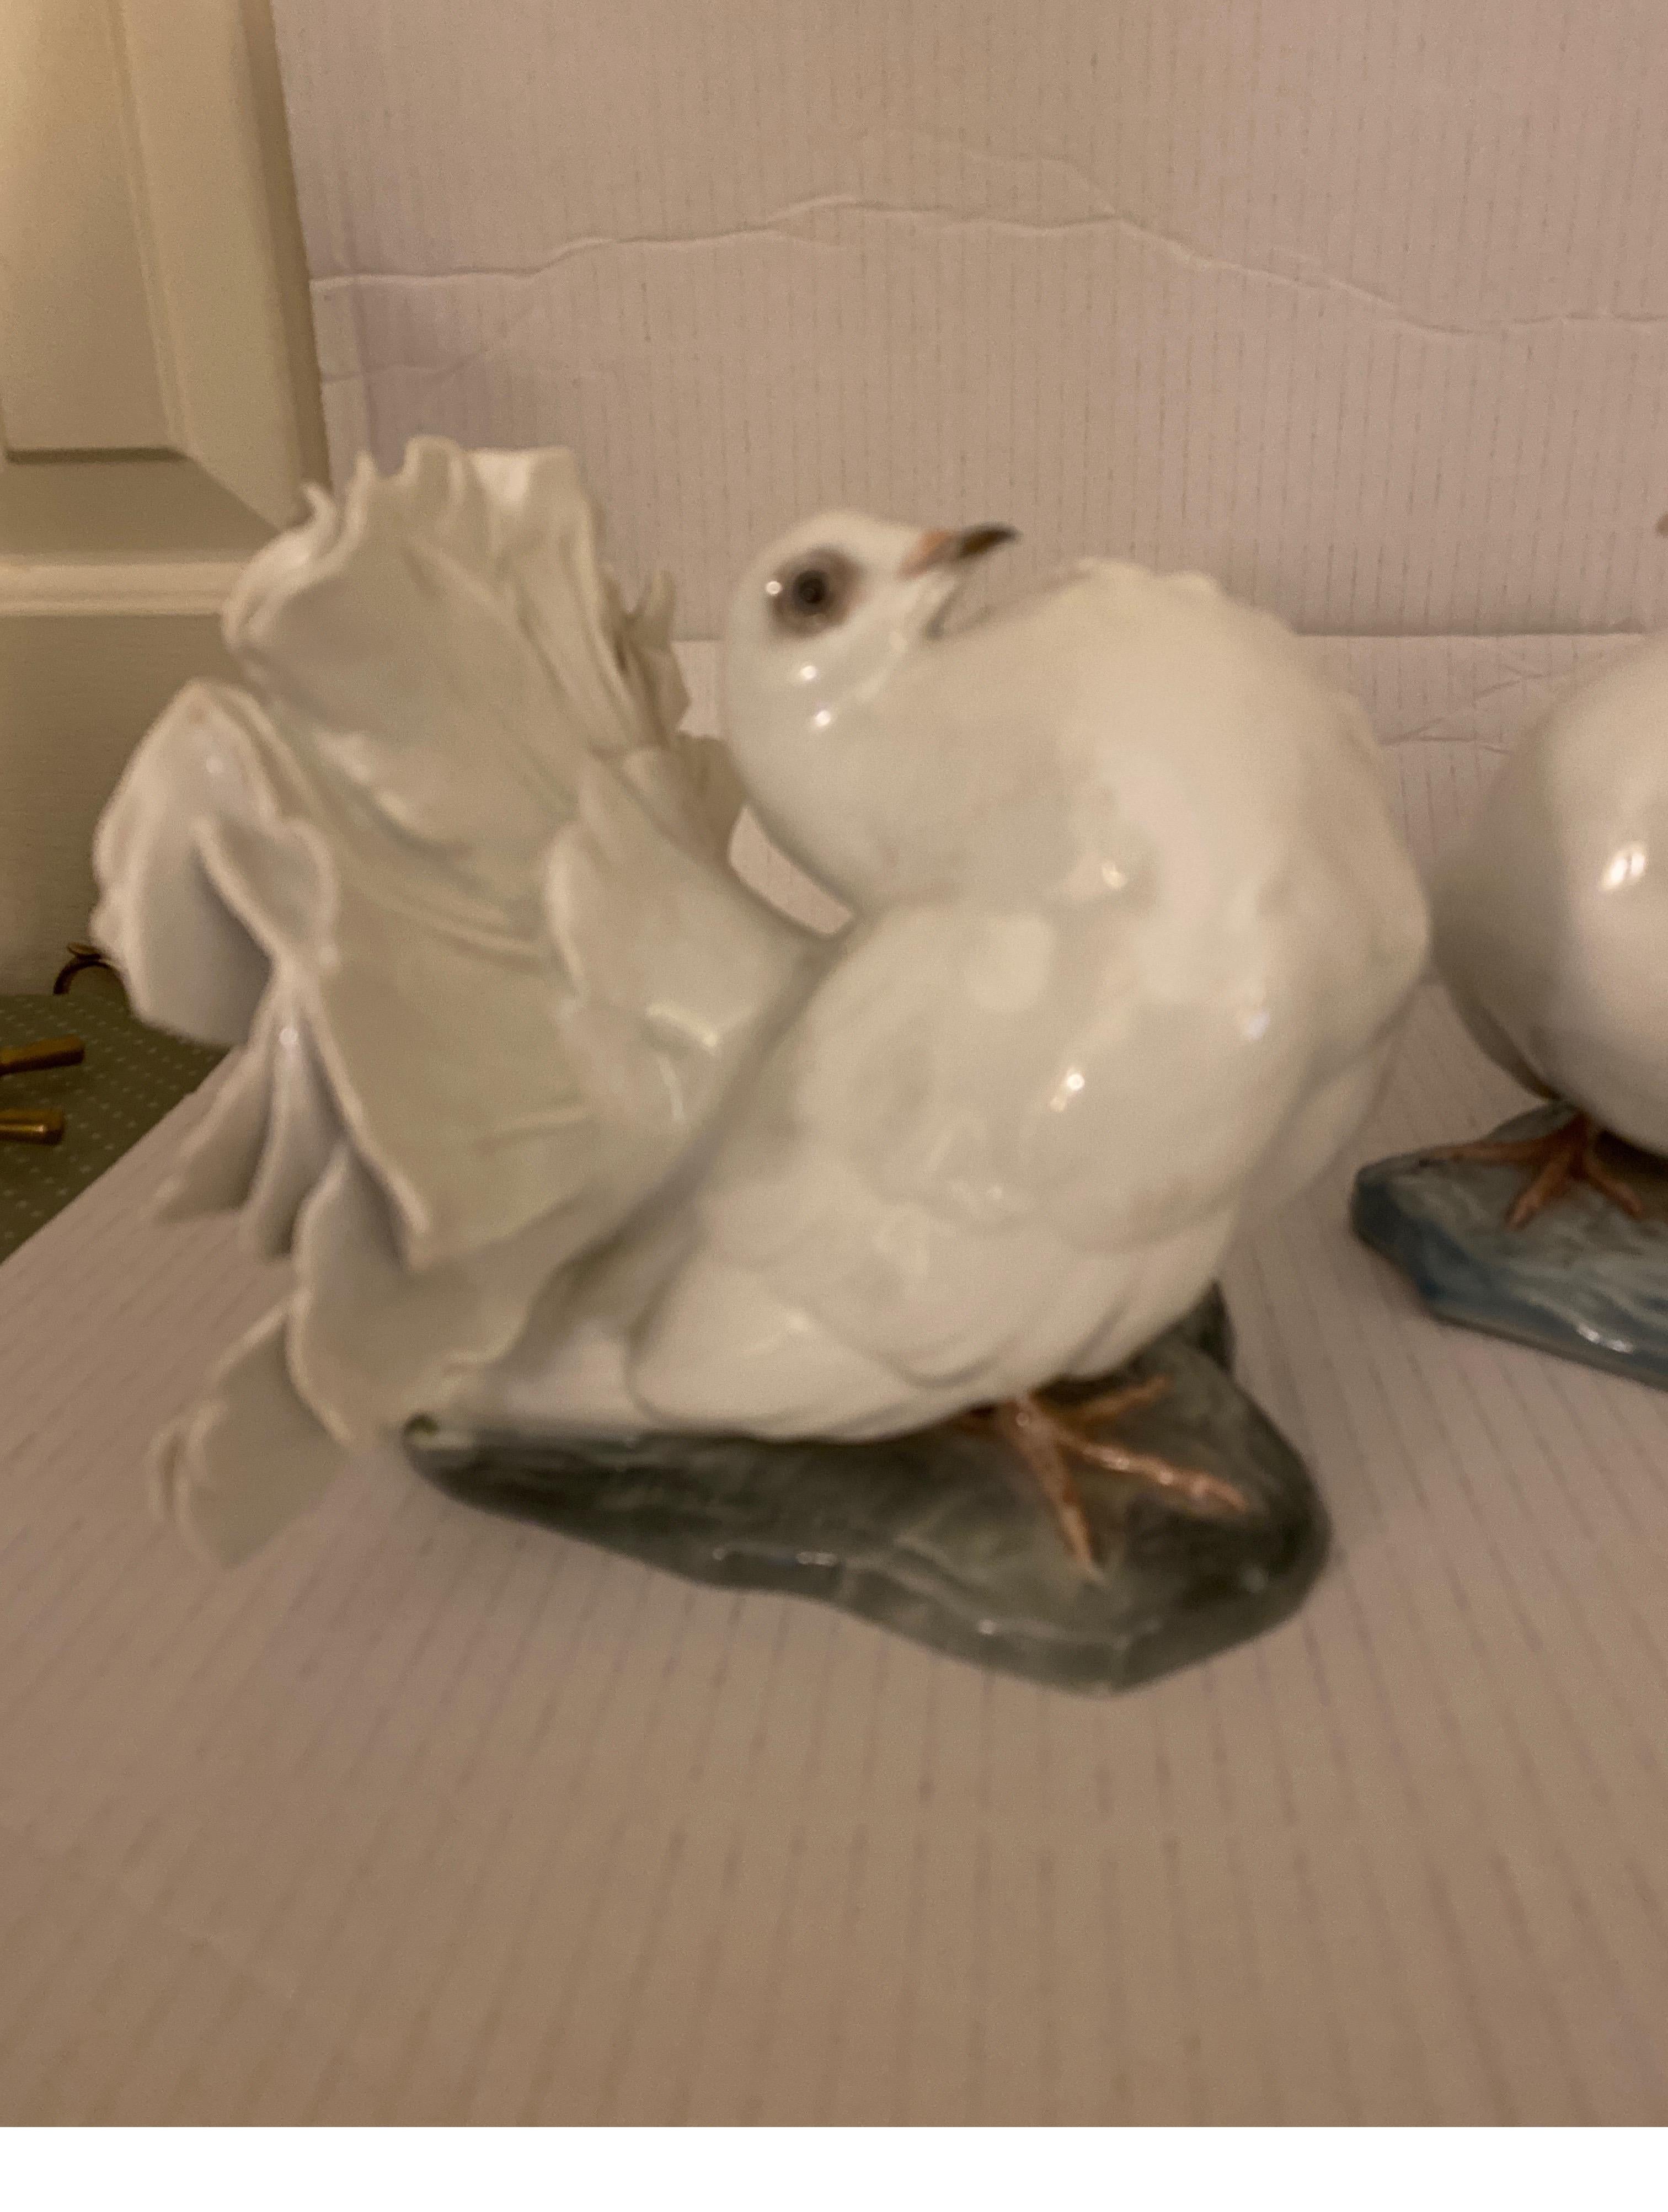 A pair of white porcelain doves by Rosenthal, by artist designer Fritz. Heidenreich. Know for his beautiful sculptures of birds and animals, most of these were designed i the 1930's The larger dove withe the puffed chest and fanned feathers is the